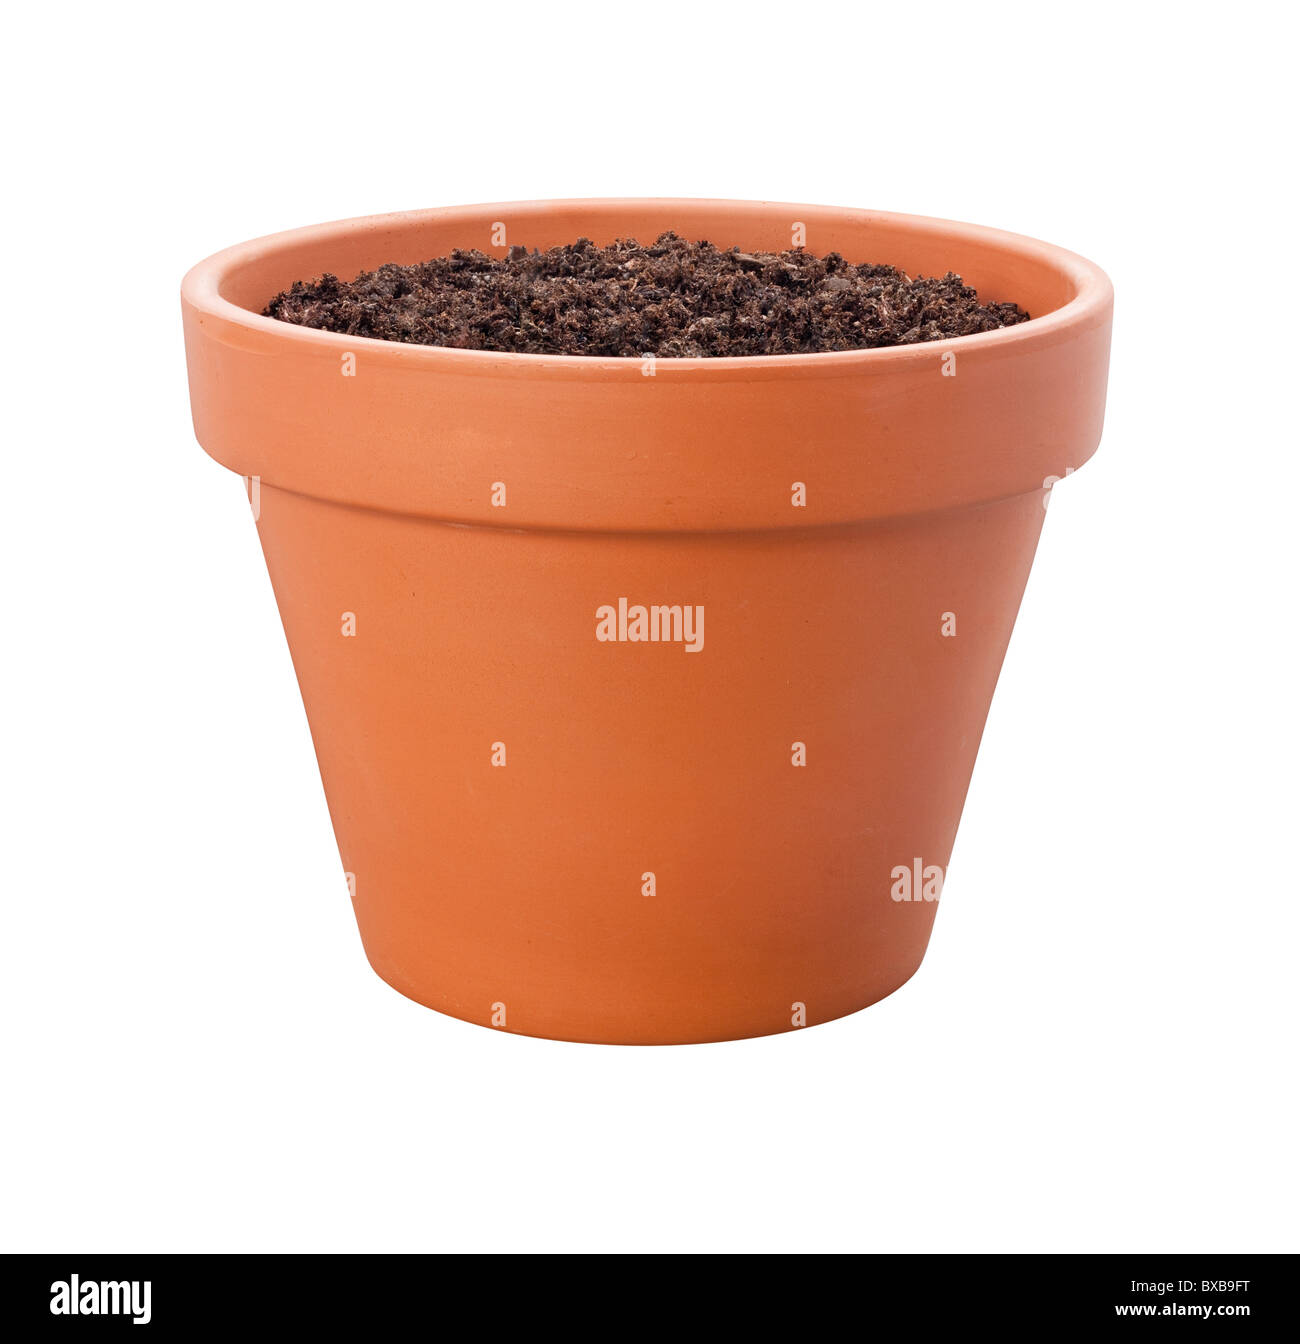 Flower Pot isolated on a white background. Full focus front & back. Stock Photo